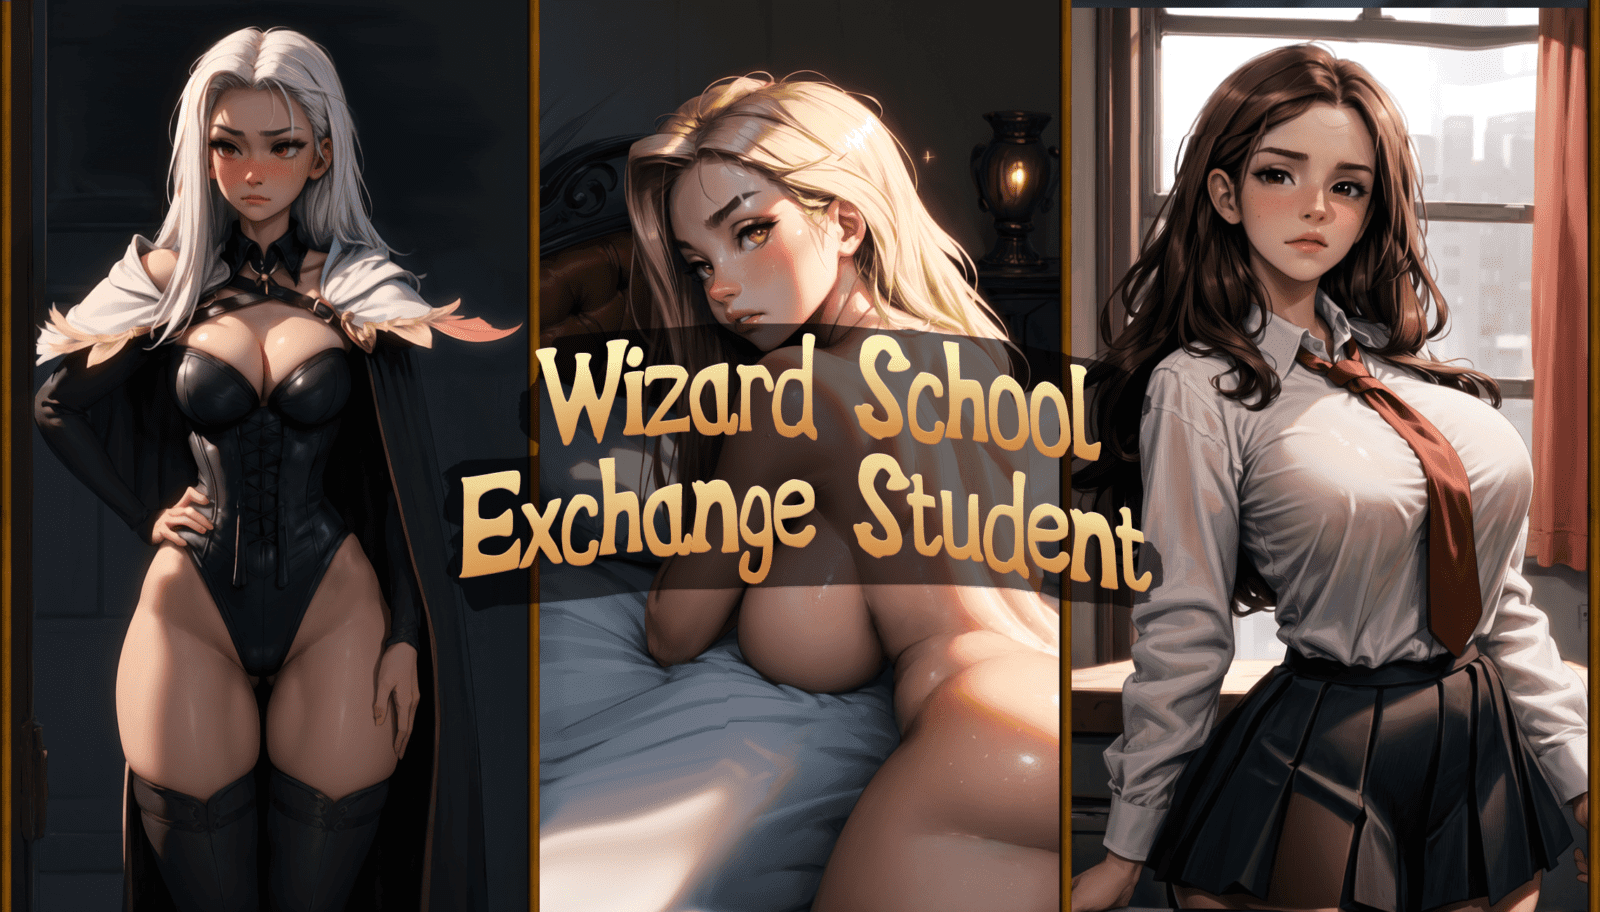 Wizard School Exchange Student Adult Parody Magical School Game Latest Version Free Download For Pc